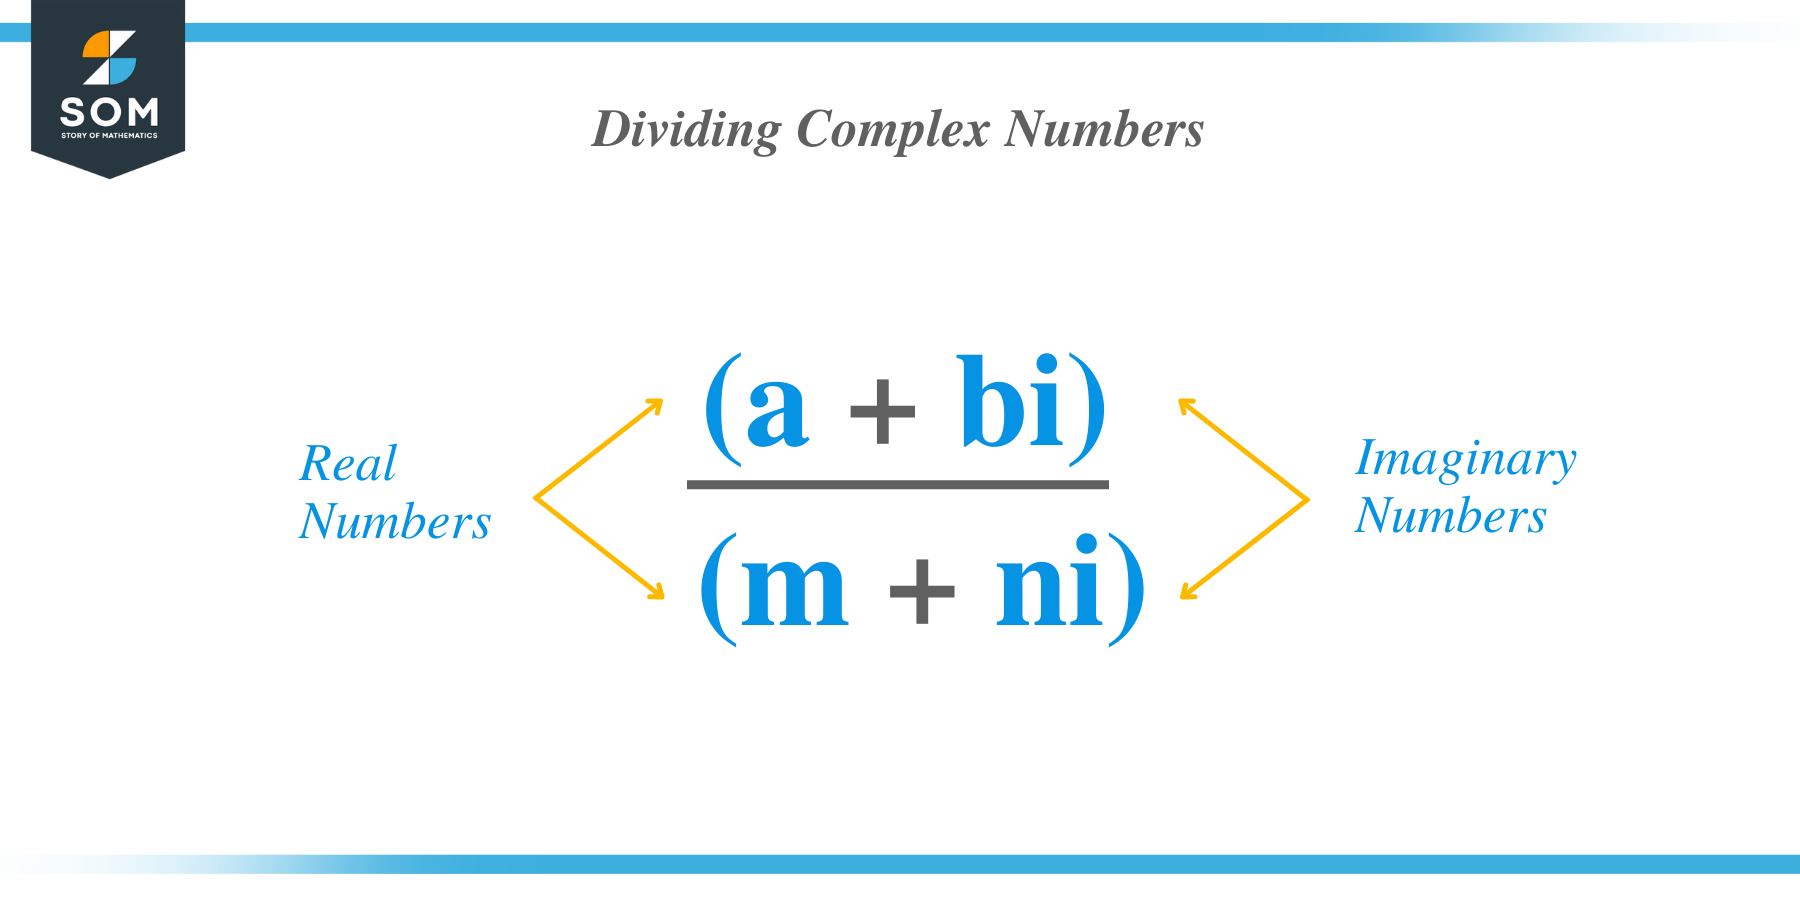 How to divide complex numbers?